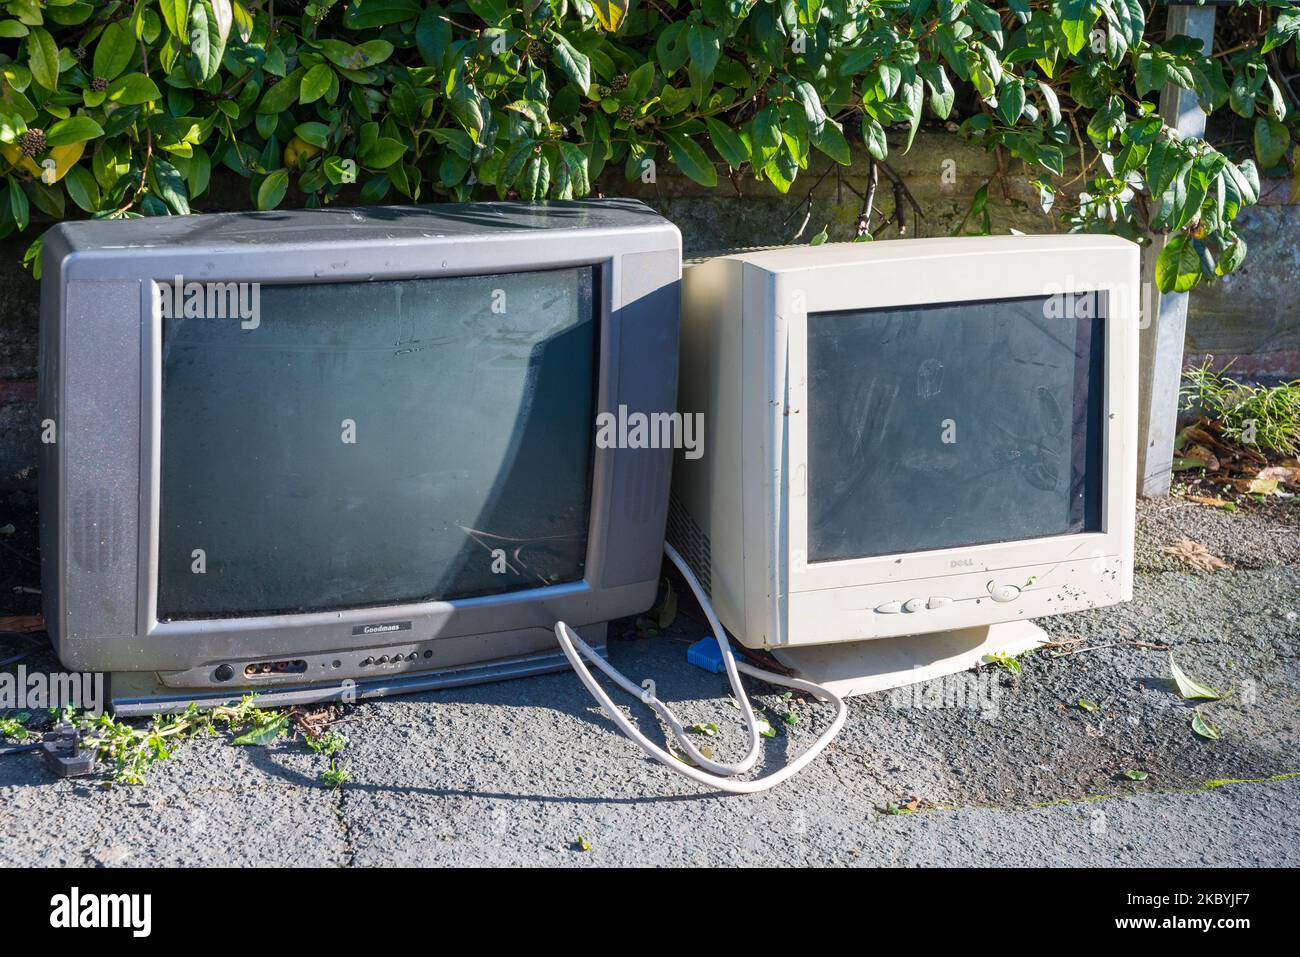 Old crt television and computer monitor left on the pavement for collection or disposal Stock Photo